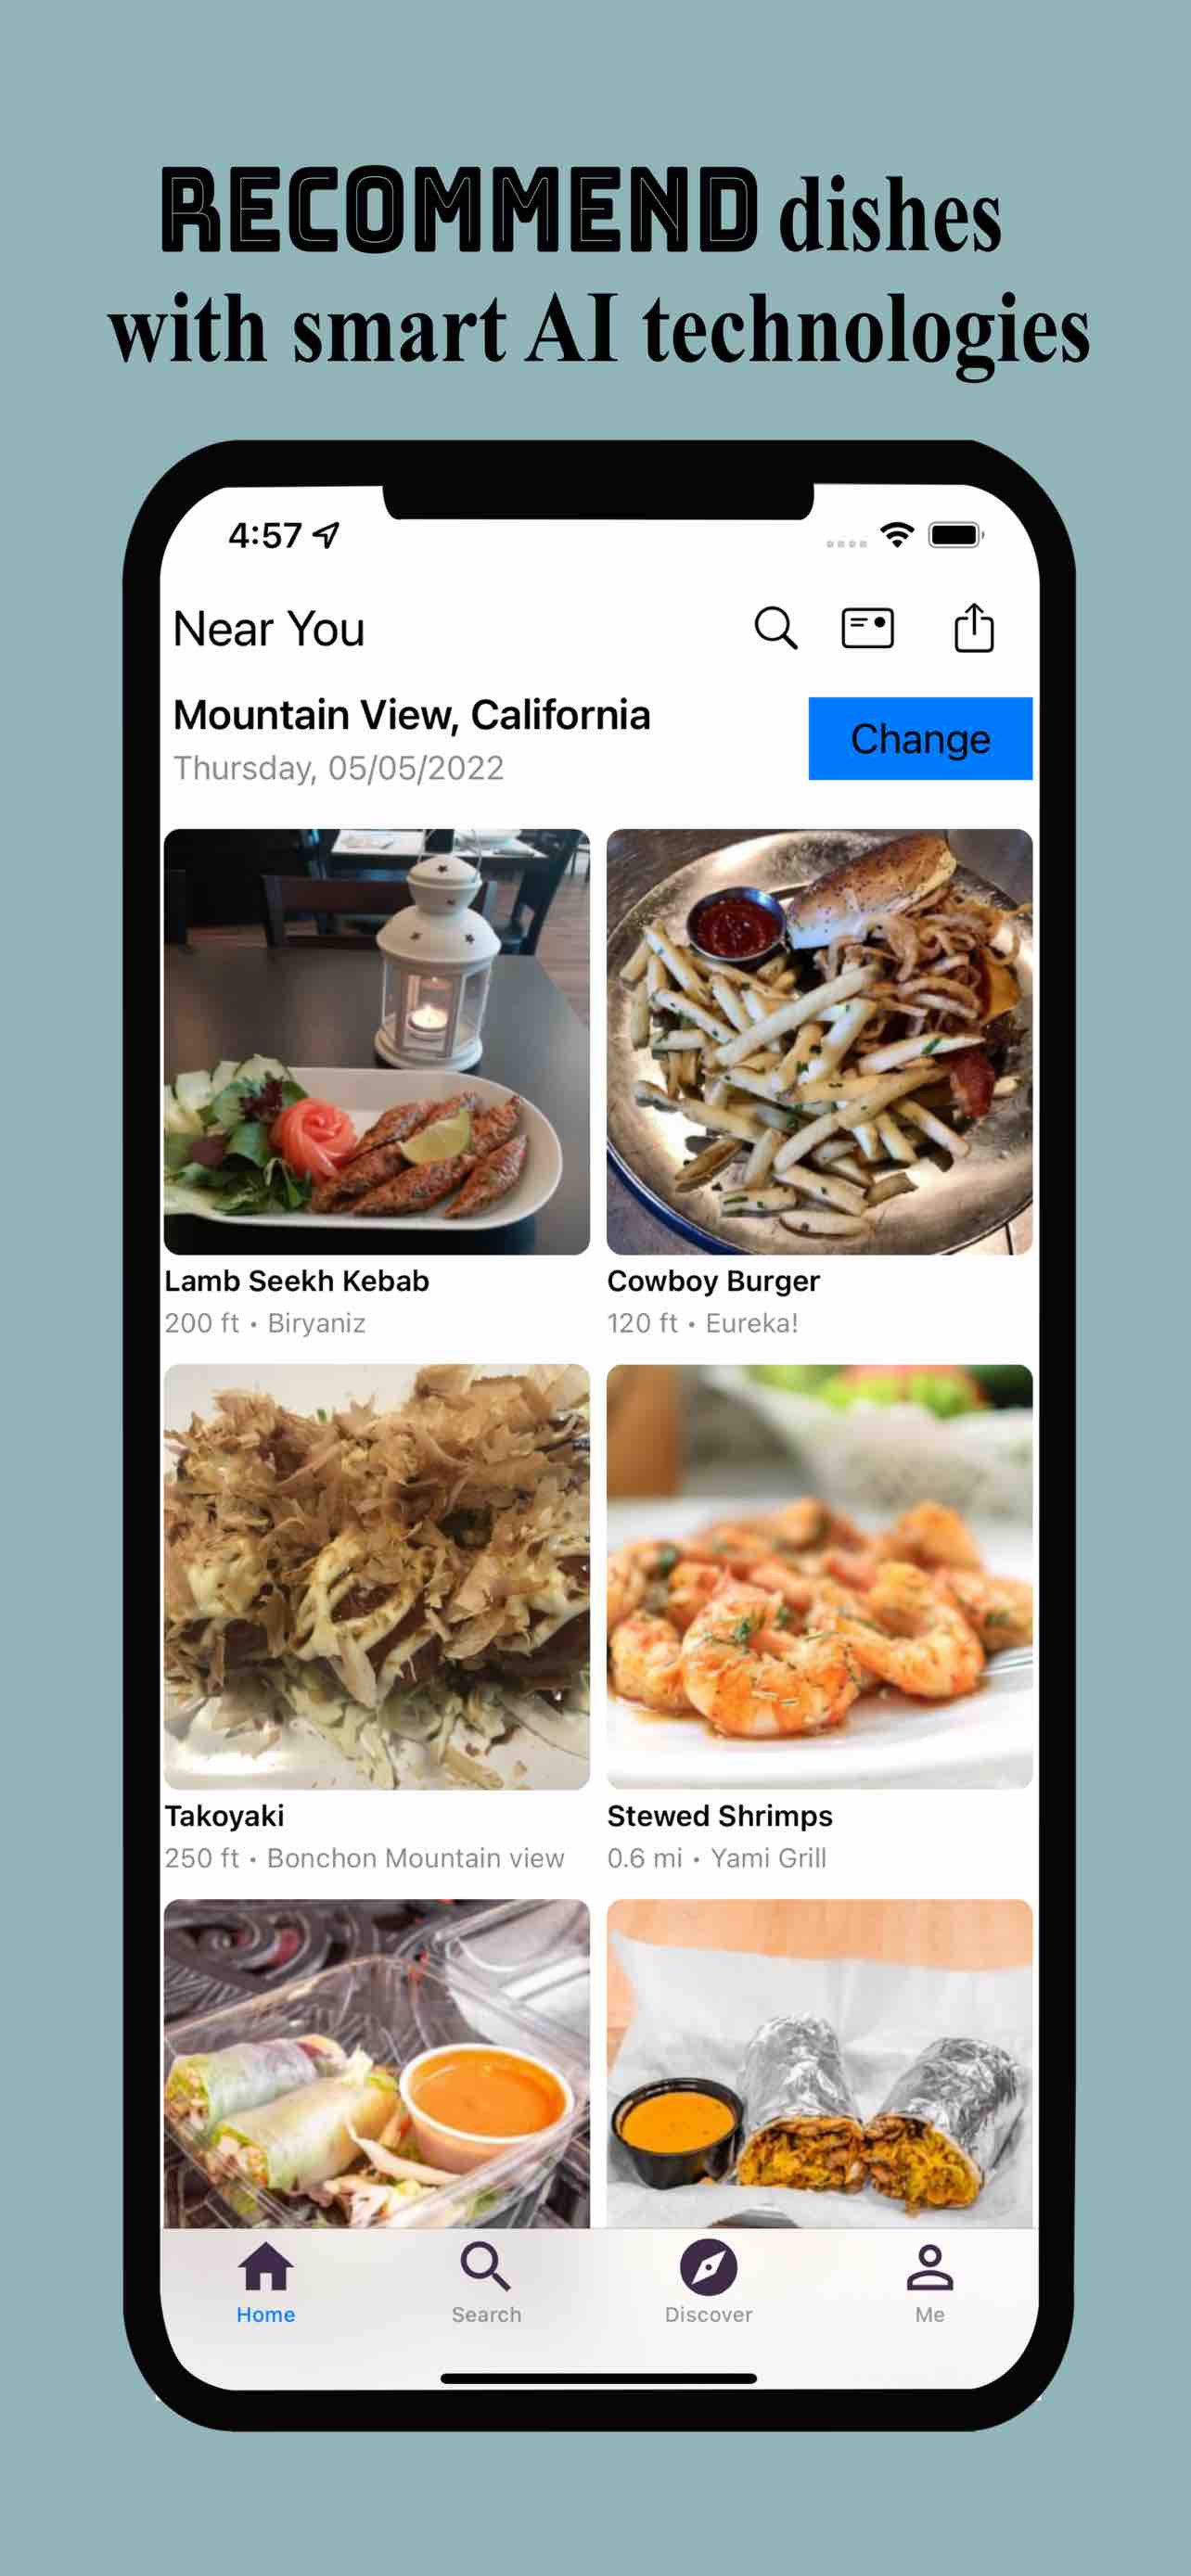 FoodSpot smart dish recommendation by leveraging artificial intelligence